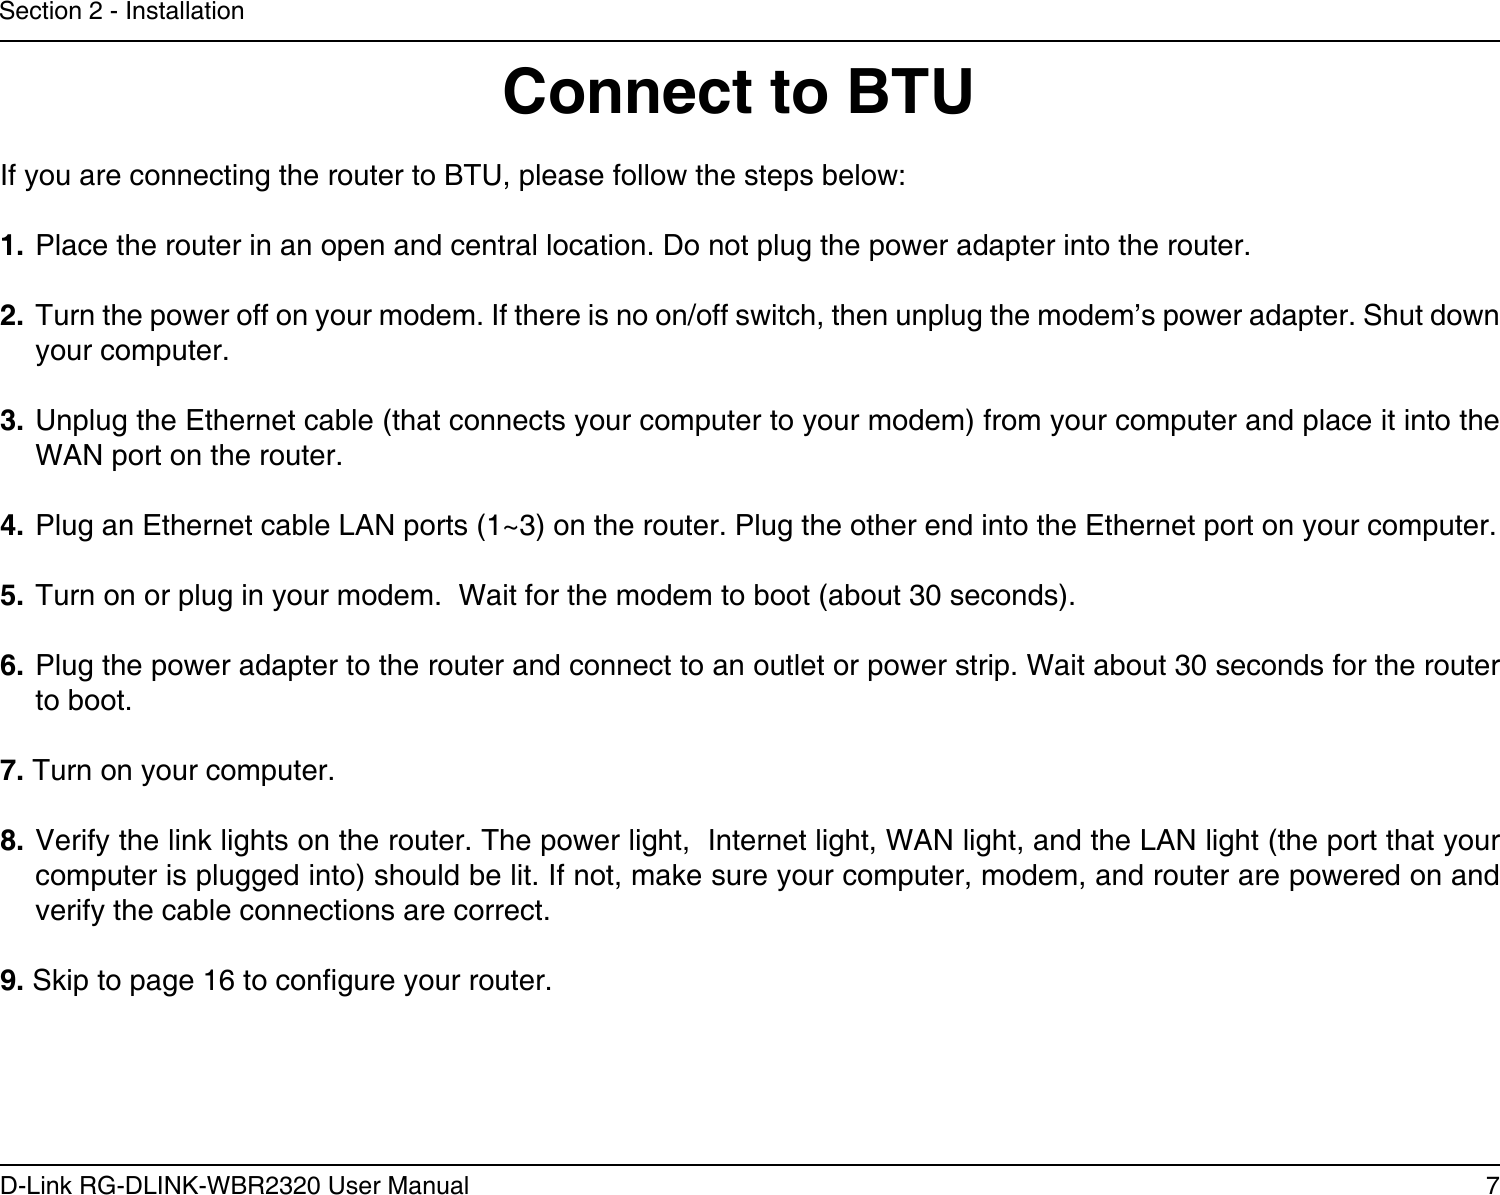 7D-Link RG-DLINK-WBR2320 User ManualSection 2 - InstallationIf you are connecting the router to BTU, please follow the steps below:1. Place the router in an open and central location. Do not plug the power adapter into the router. 2. Turn the power off on your modem. If there is no on/off switch, then unplug the modem’s power adapter. Shut down your computer.3. Unplug the Ethernet cable (that connects your computer to your modem) from your computer and place it into the WAN port on the router.  4. Plug an Ethernet cable LAN ports (1~3) on the router. Plug the other end into the Ethernet port on your computer.5. Turn on or plug in your modem.  Wait for the modem to boot (about 30 seconds). 6. Plug the power adapter to the router and connect to an outlet or power strip. Wait about 30 seconds for the router to boot. 7. Turn on your computer. 8. Verify the link lights on the router. The power light,  Internet light, WAN light, and the LAN light (the port that your computer is plugged into) should be lit. If not, make sure your computer, modem, and router are powered on and verify the cable connections are correct. 9. Skip to page 16 to congure your router. Connect to BTU